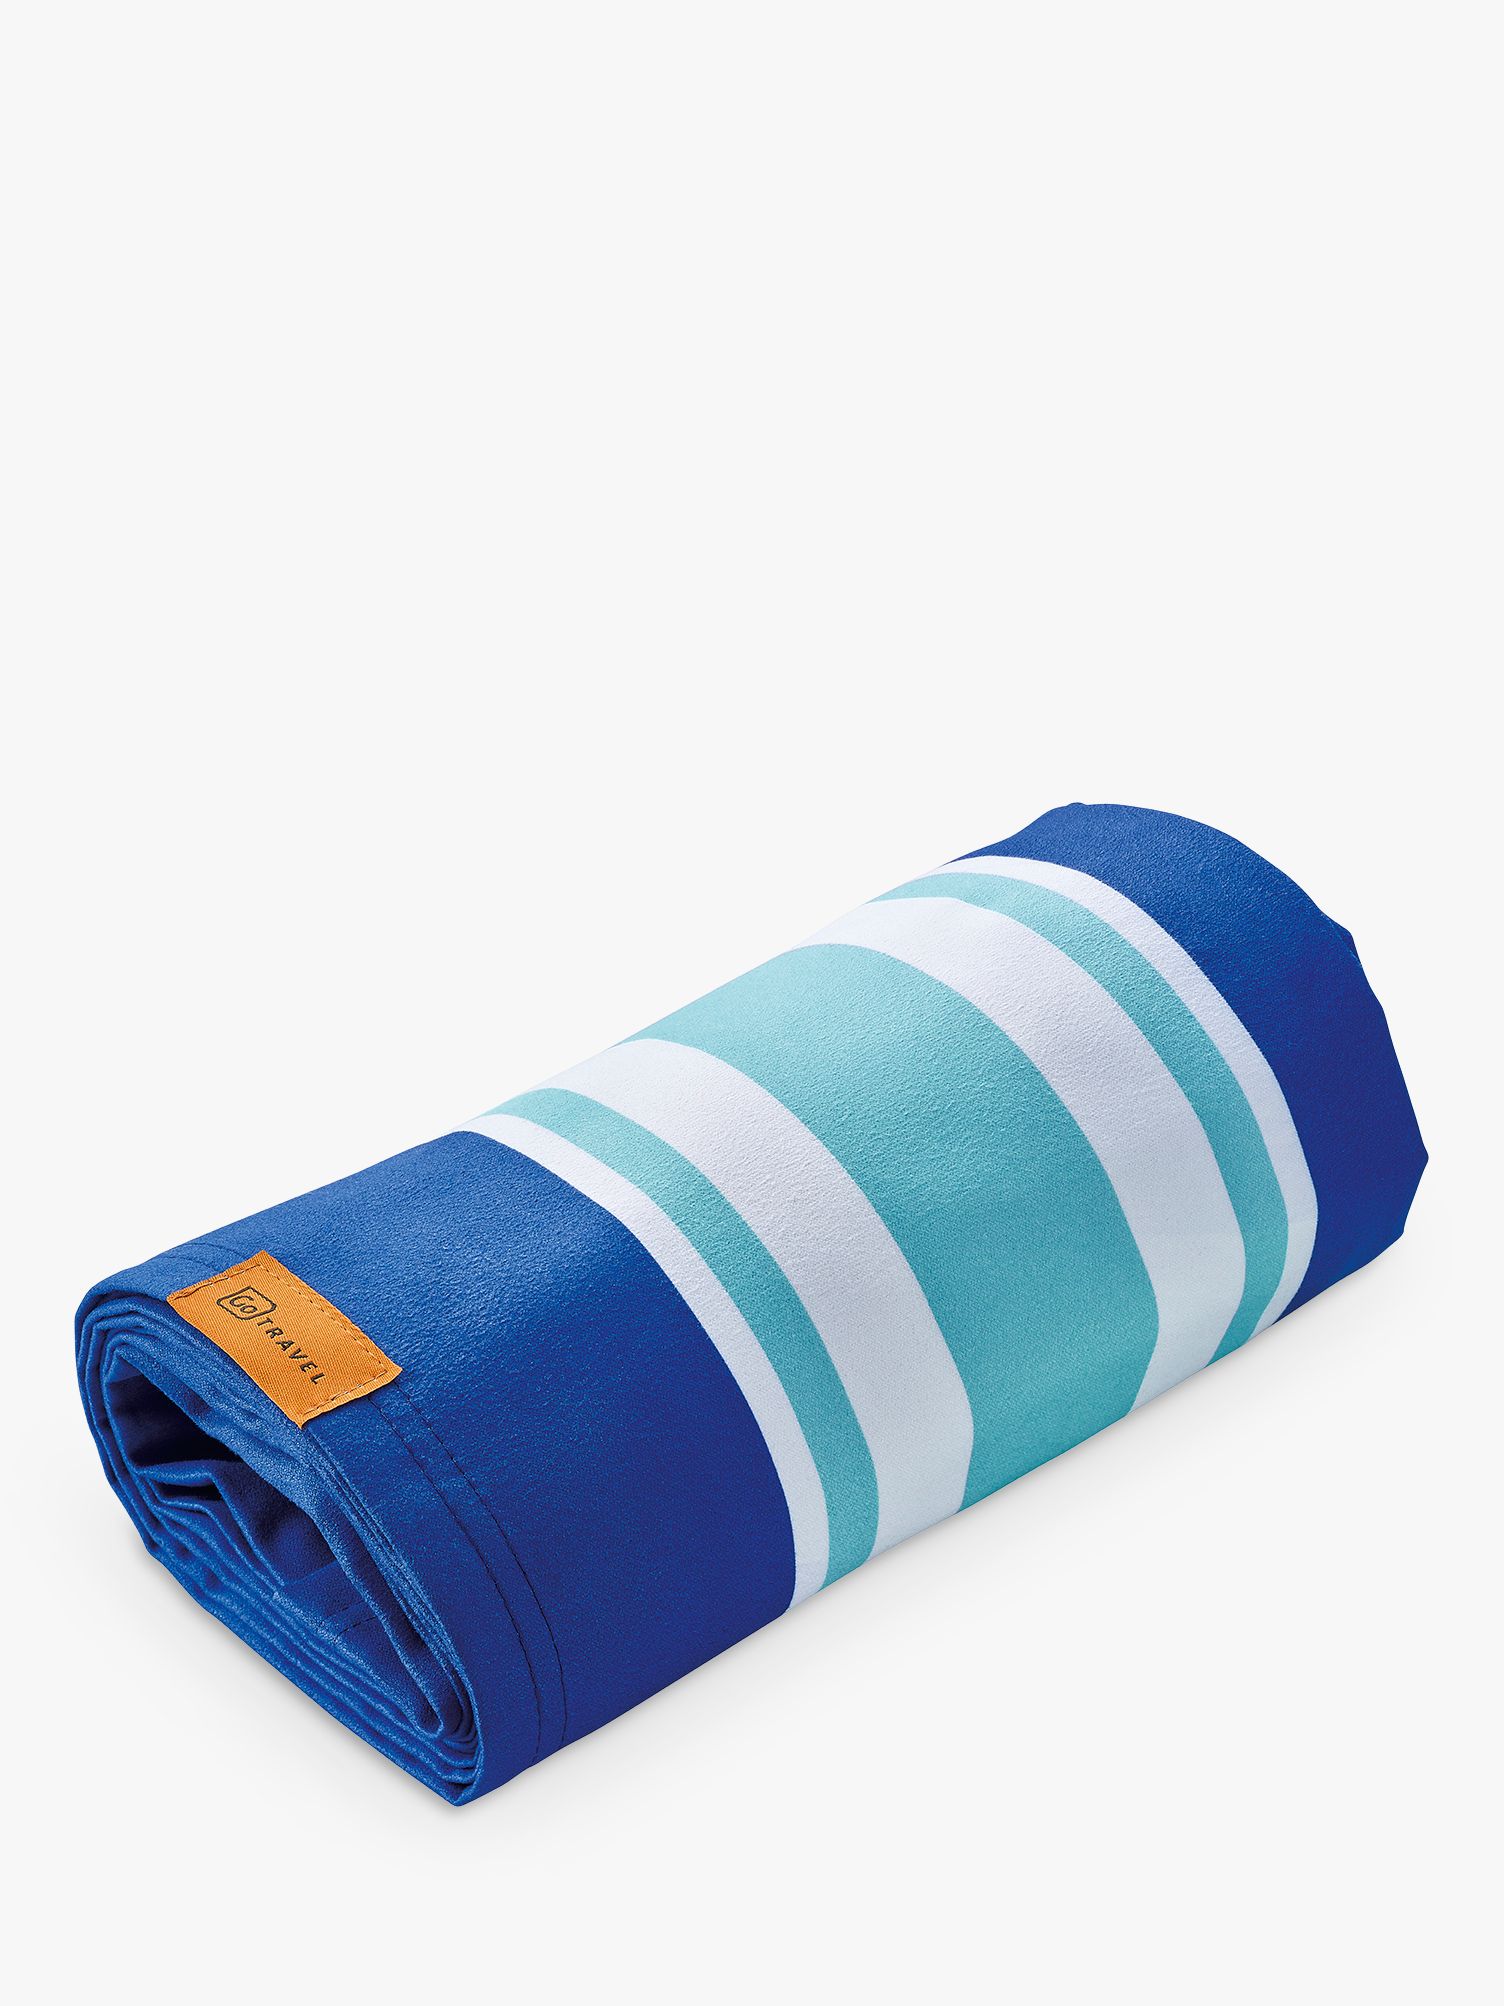 Beach Towels - All you need to know – Allure Bath Fashions